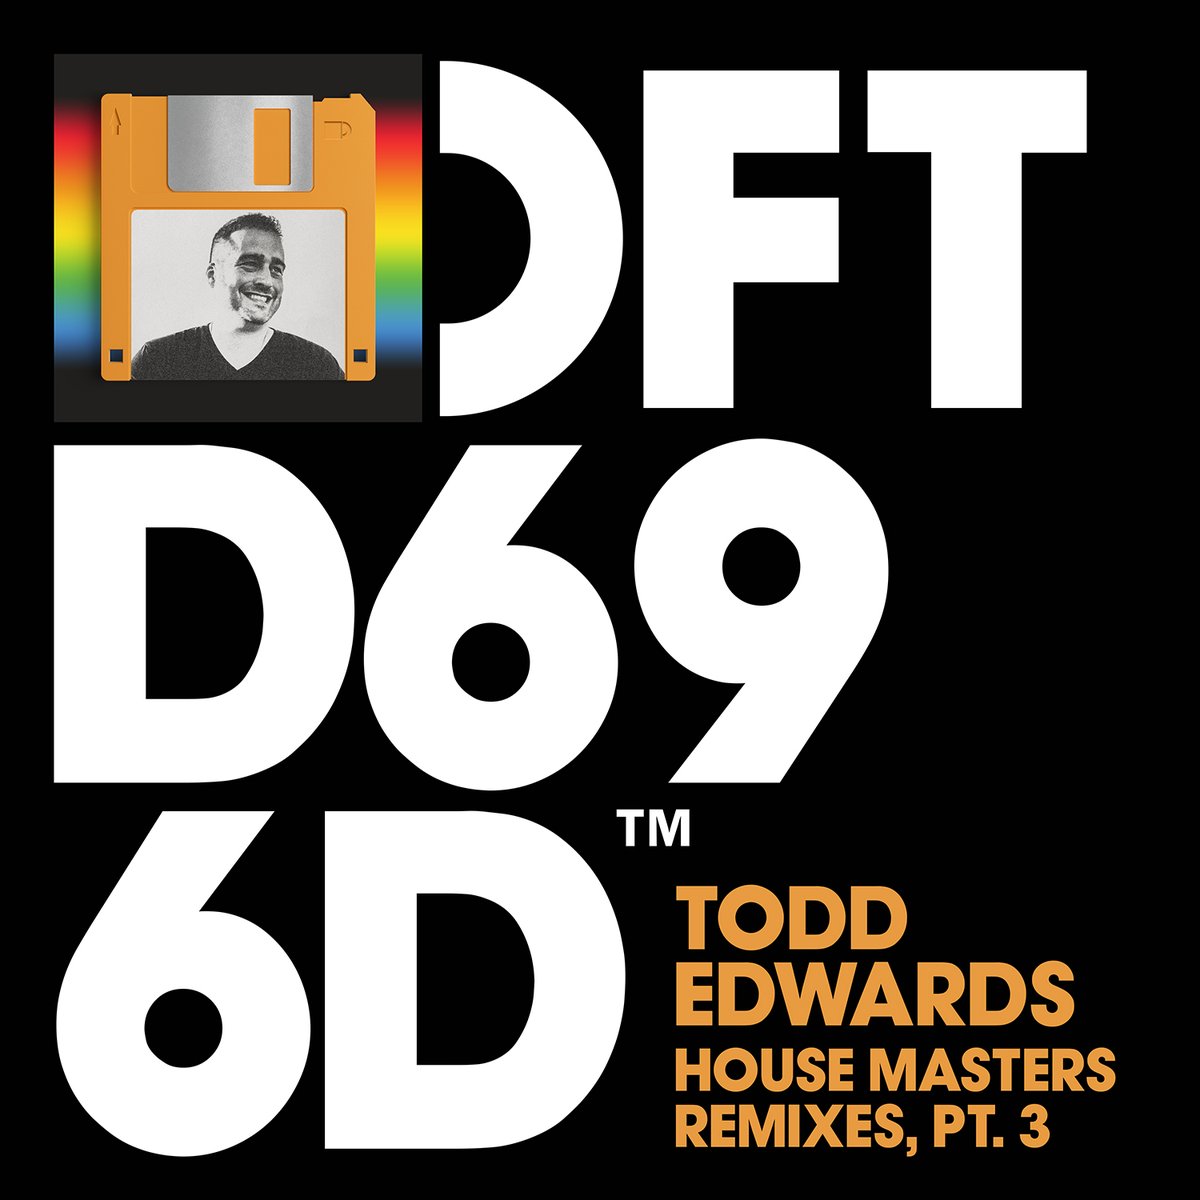 The 3rd instalment of the legendary @toddedwards3000 House Masters Remixes has landed!

Featuring 4 new remixes for your ears, courtesy of @itsbiscits, @djqmusic, @LPGiobbi & @atrak 

On promo and out now on @DefectedRecords